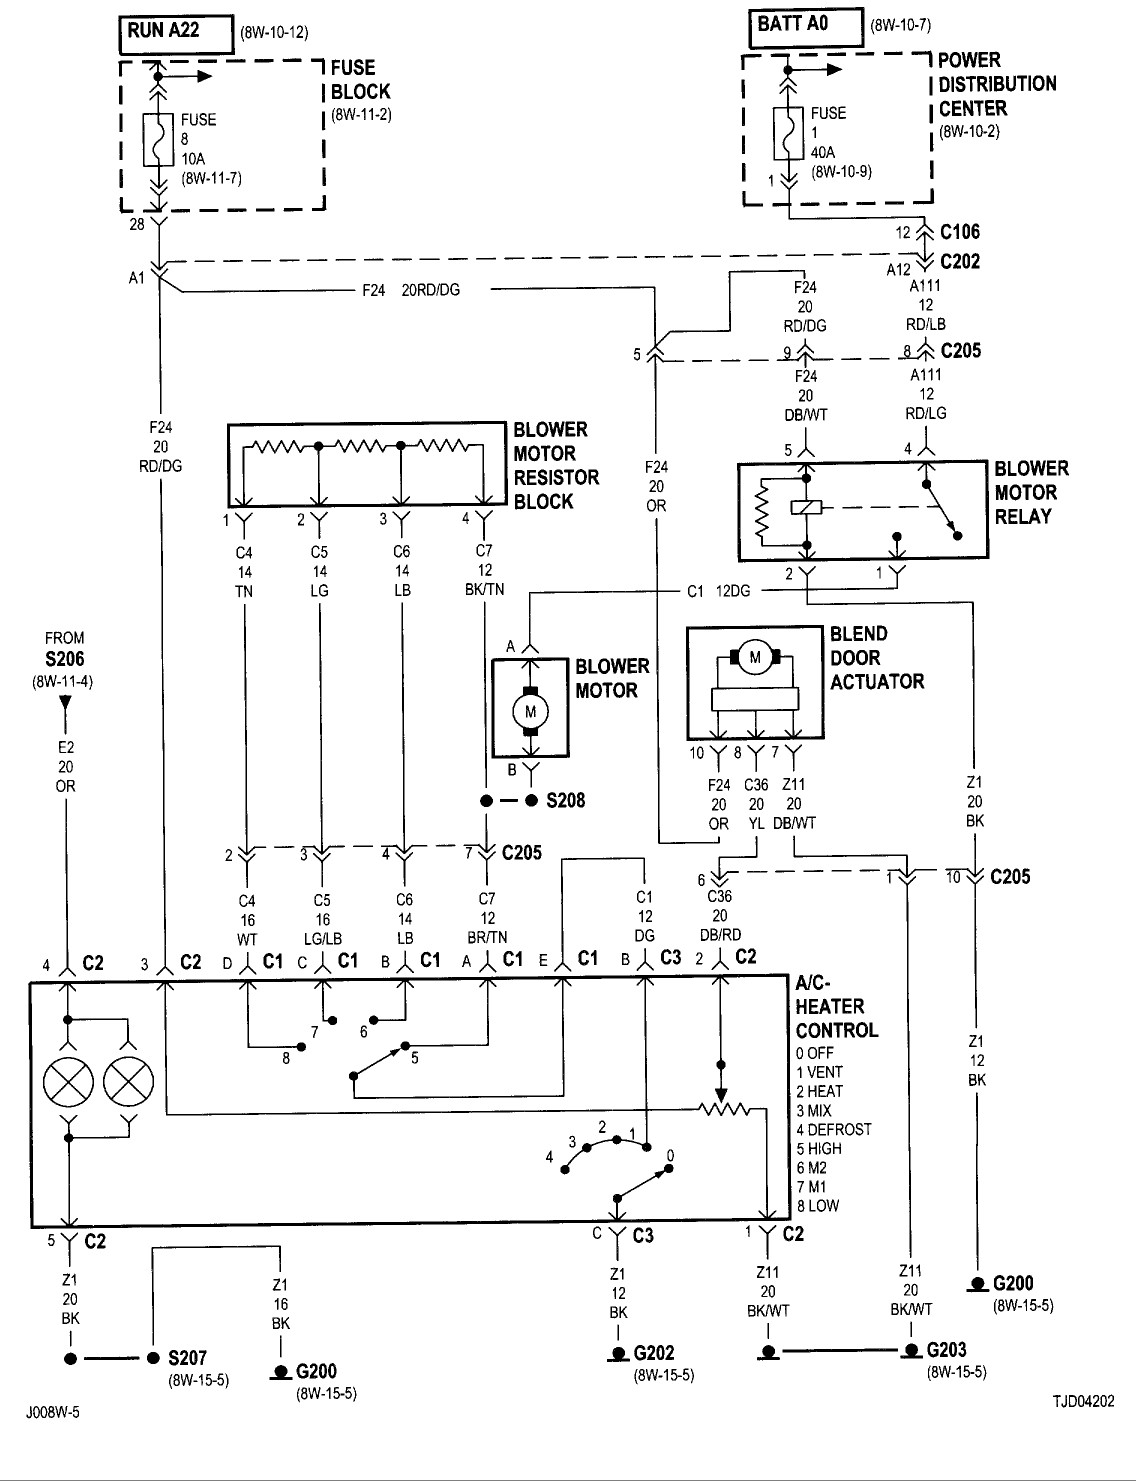 91 Jeep Wrangler Wiring Diagram from mainetreasurechest.com